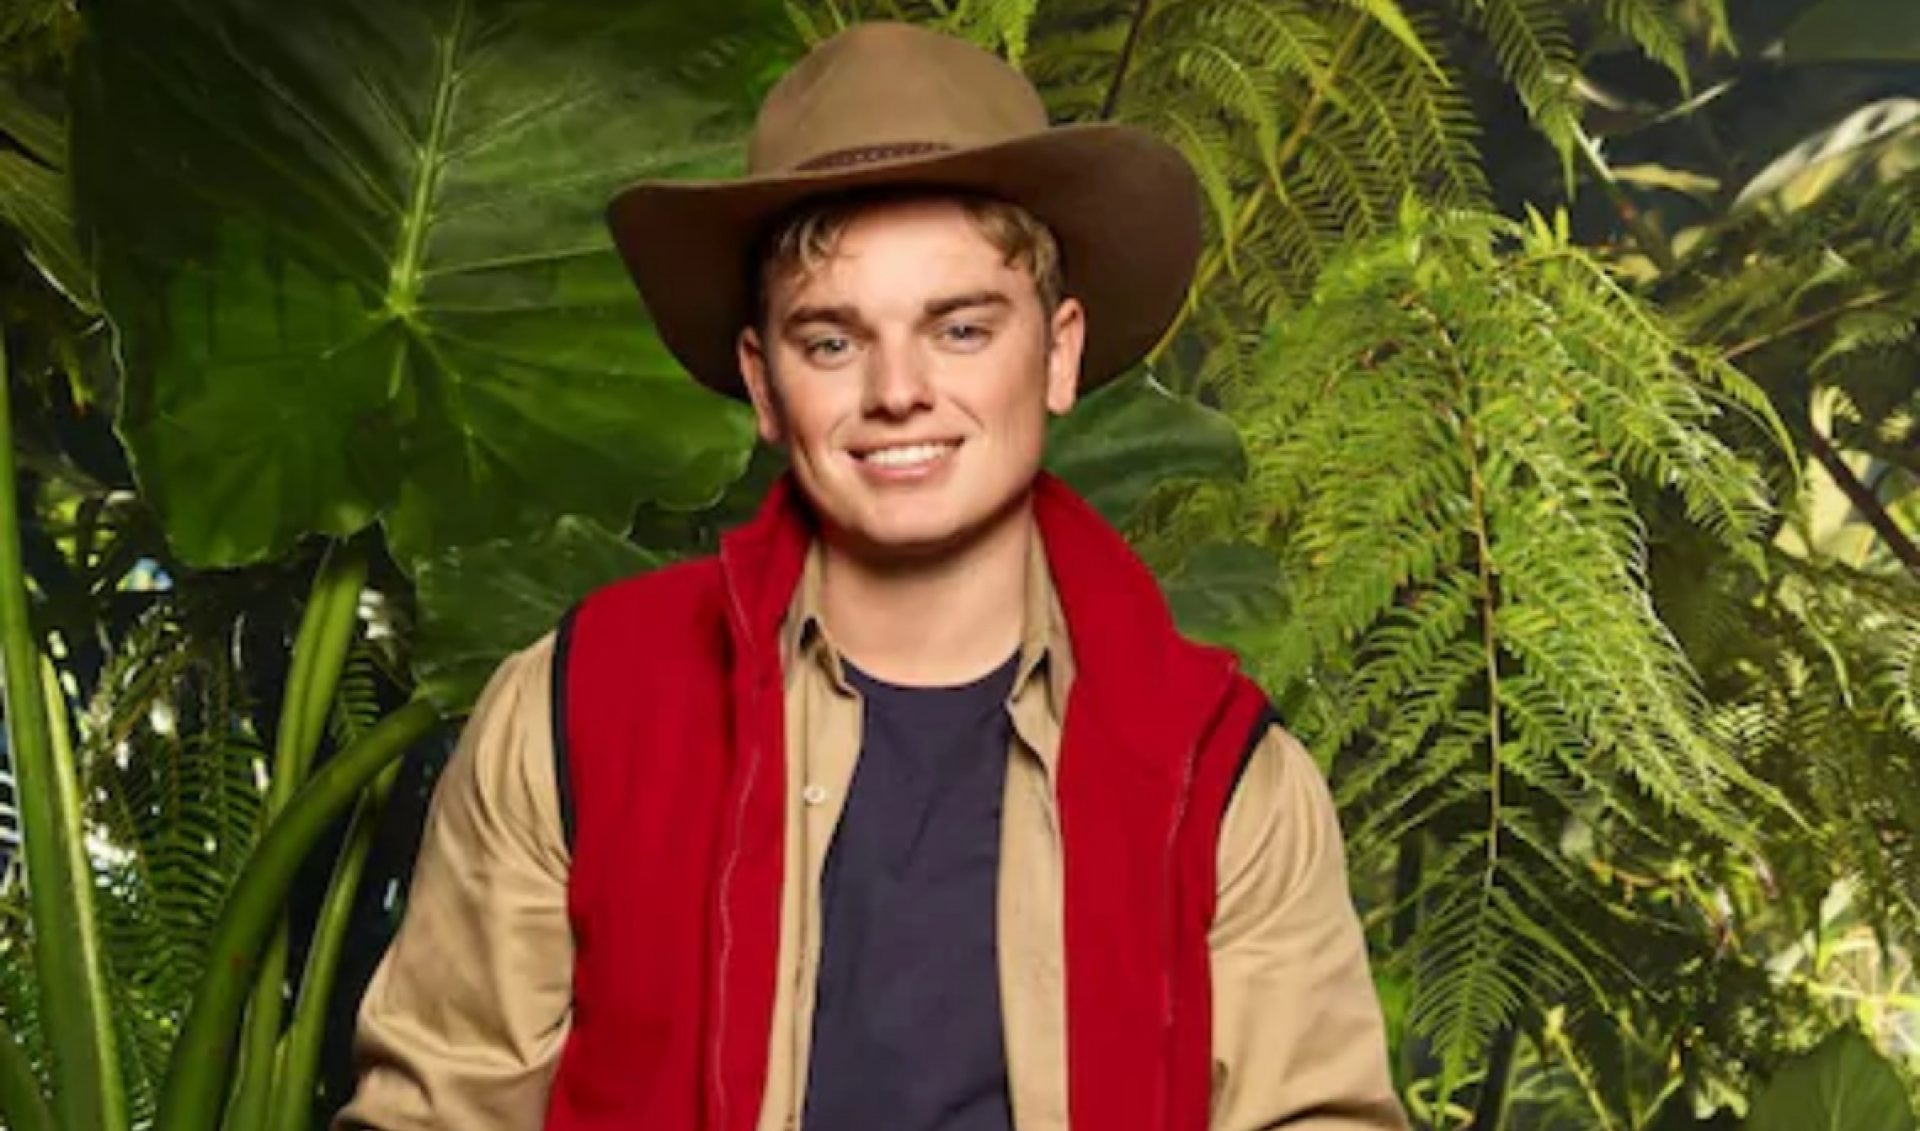 YouTube Star Jack Maynard Departs English Reality Show After Controversy Related To Old Tweets